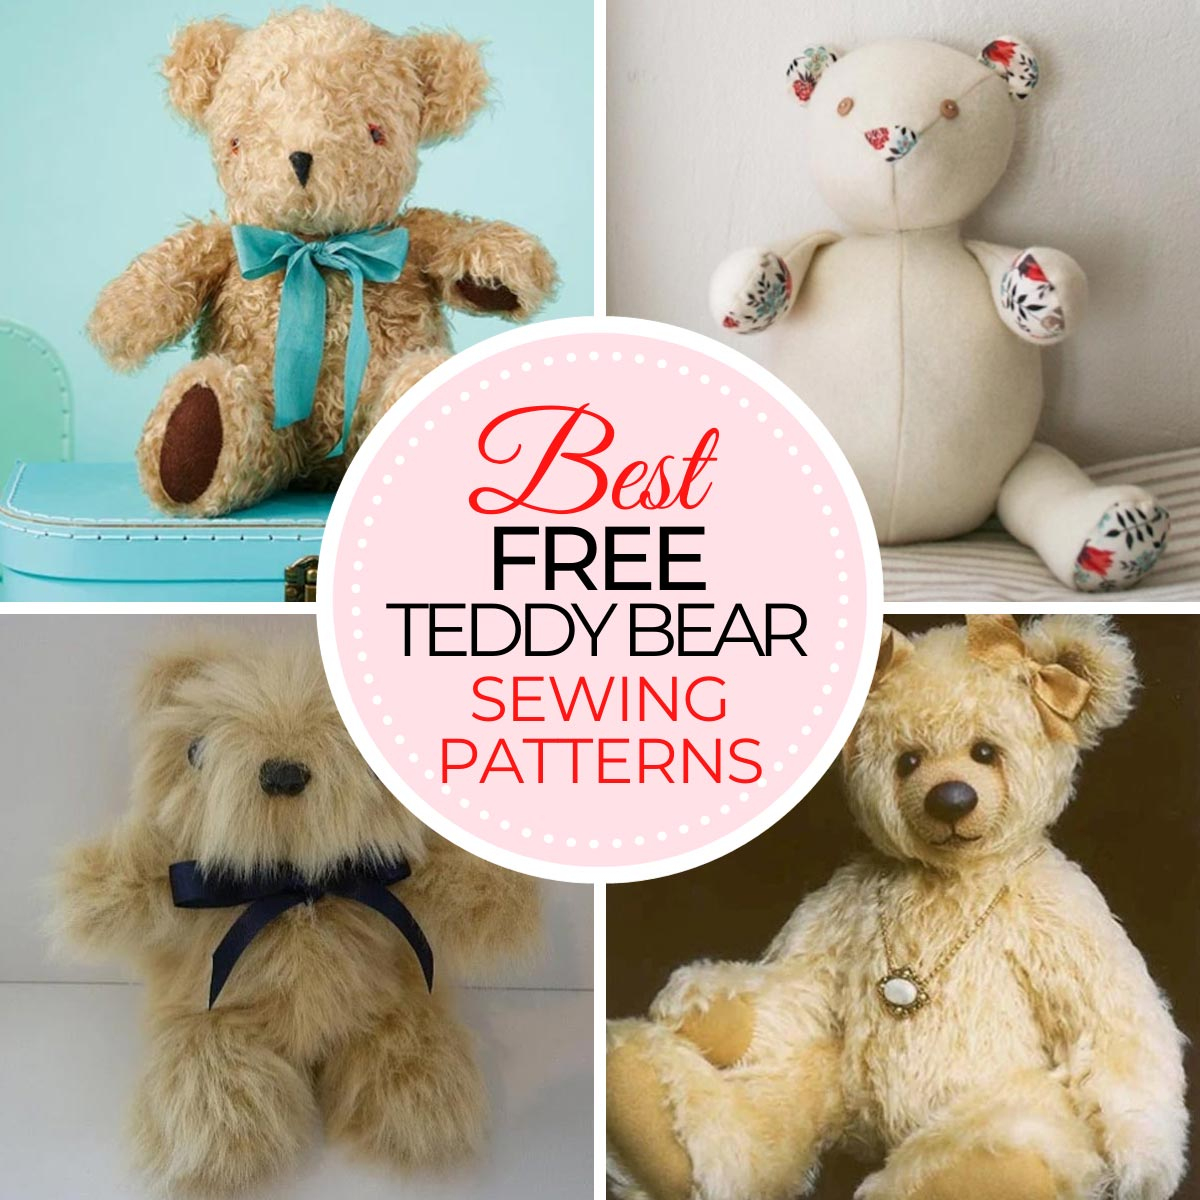 27 Free Teddy Bear Sewing Patterns To Make Today | Treasurie - Teddy Bear Patterns Free Printable